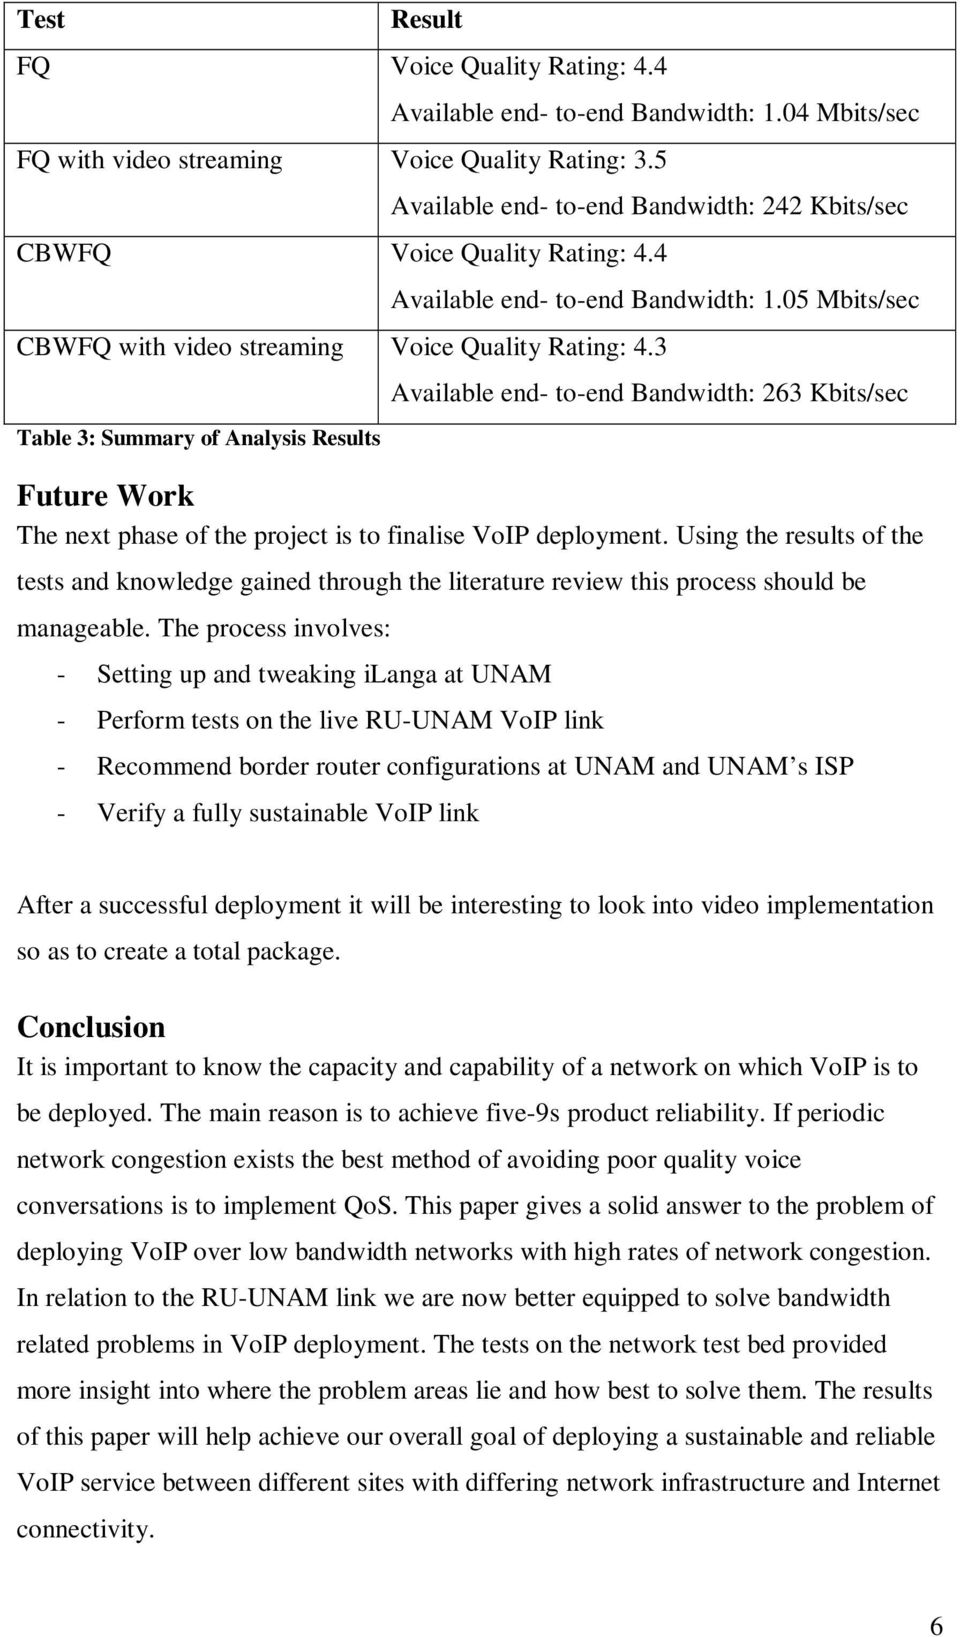 3 Table 3: Summary of Analysis Results Available end- to-end Bandwidth: 263 Kbits/sec Future Work The next phase of the project is to finalise VoIP deployment.